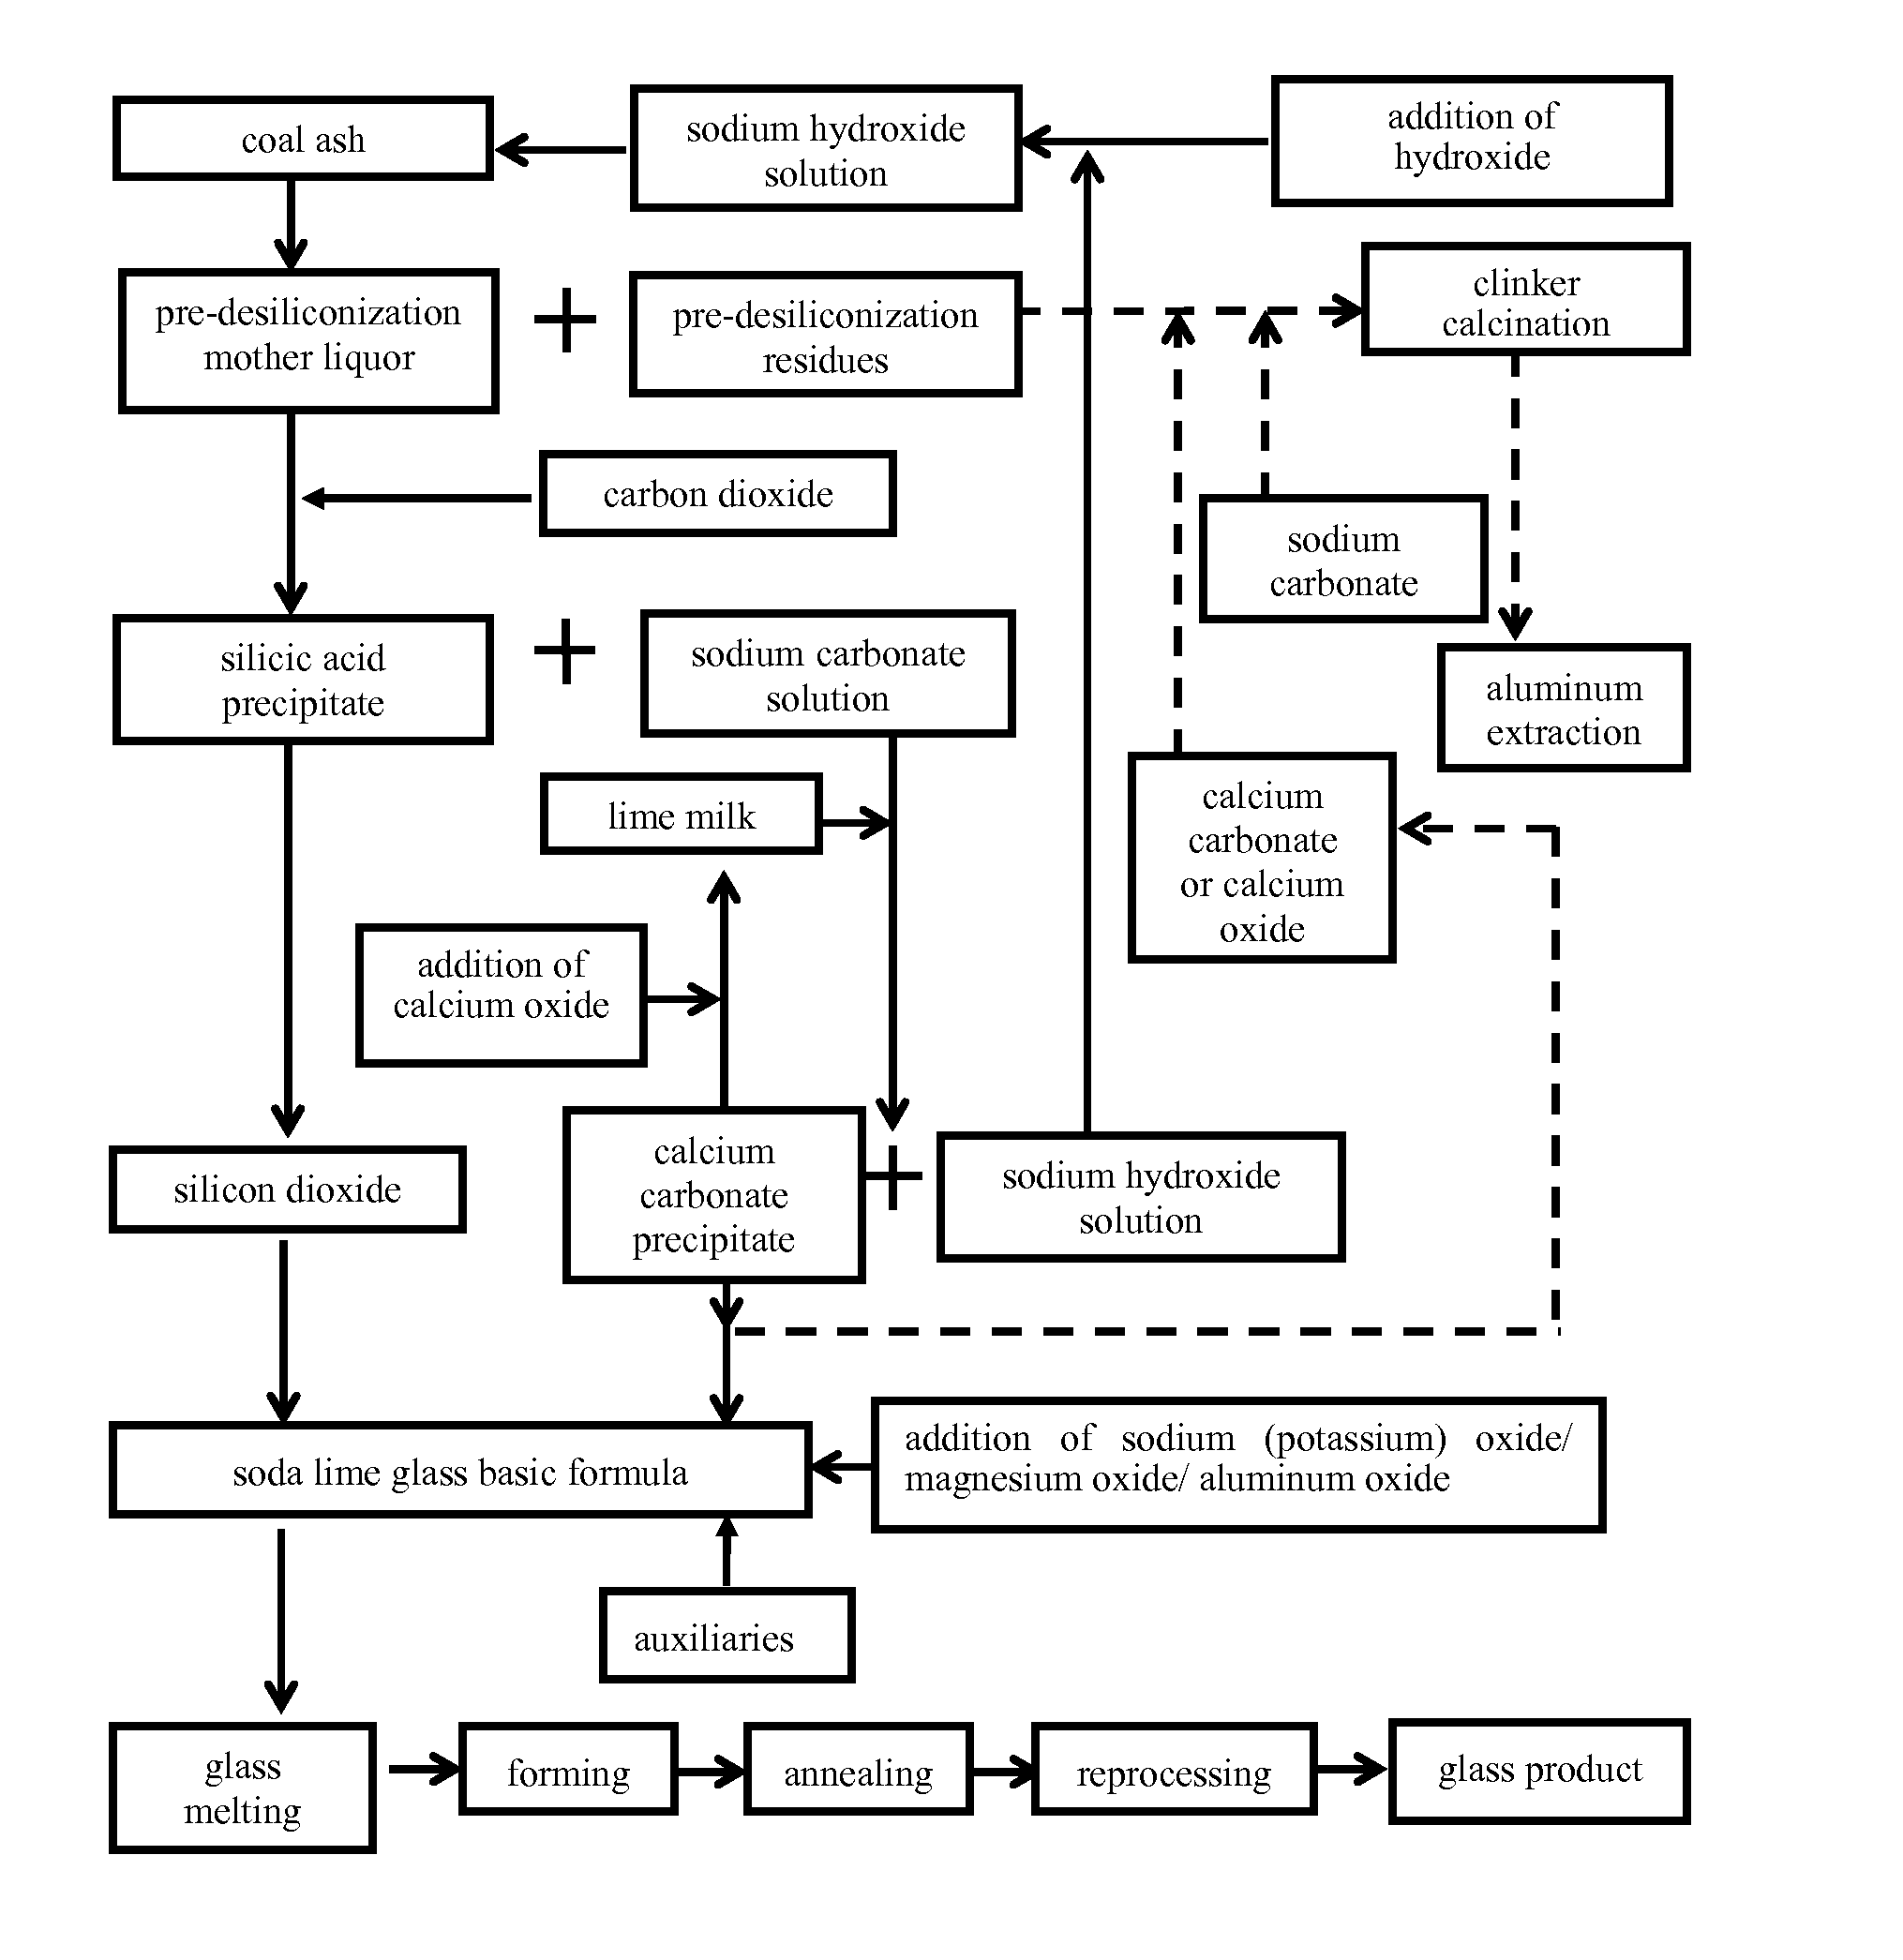 Method for Preparing a Soda-Lime-Silica Glass Basic Formulation and a Method for Extracting Aluminum from Coal Ash for Co-Production of Glass